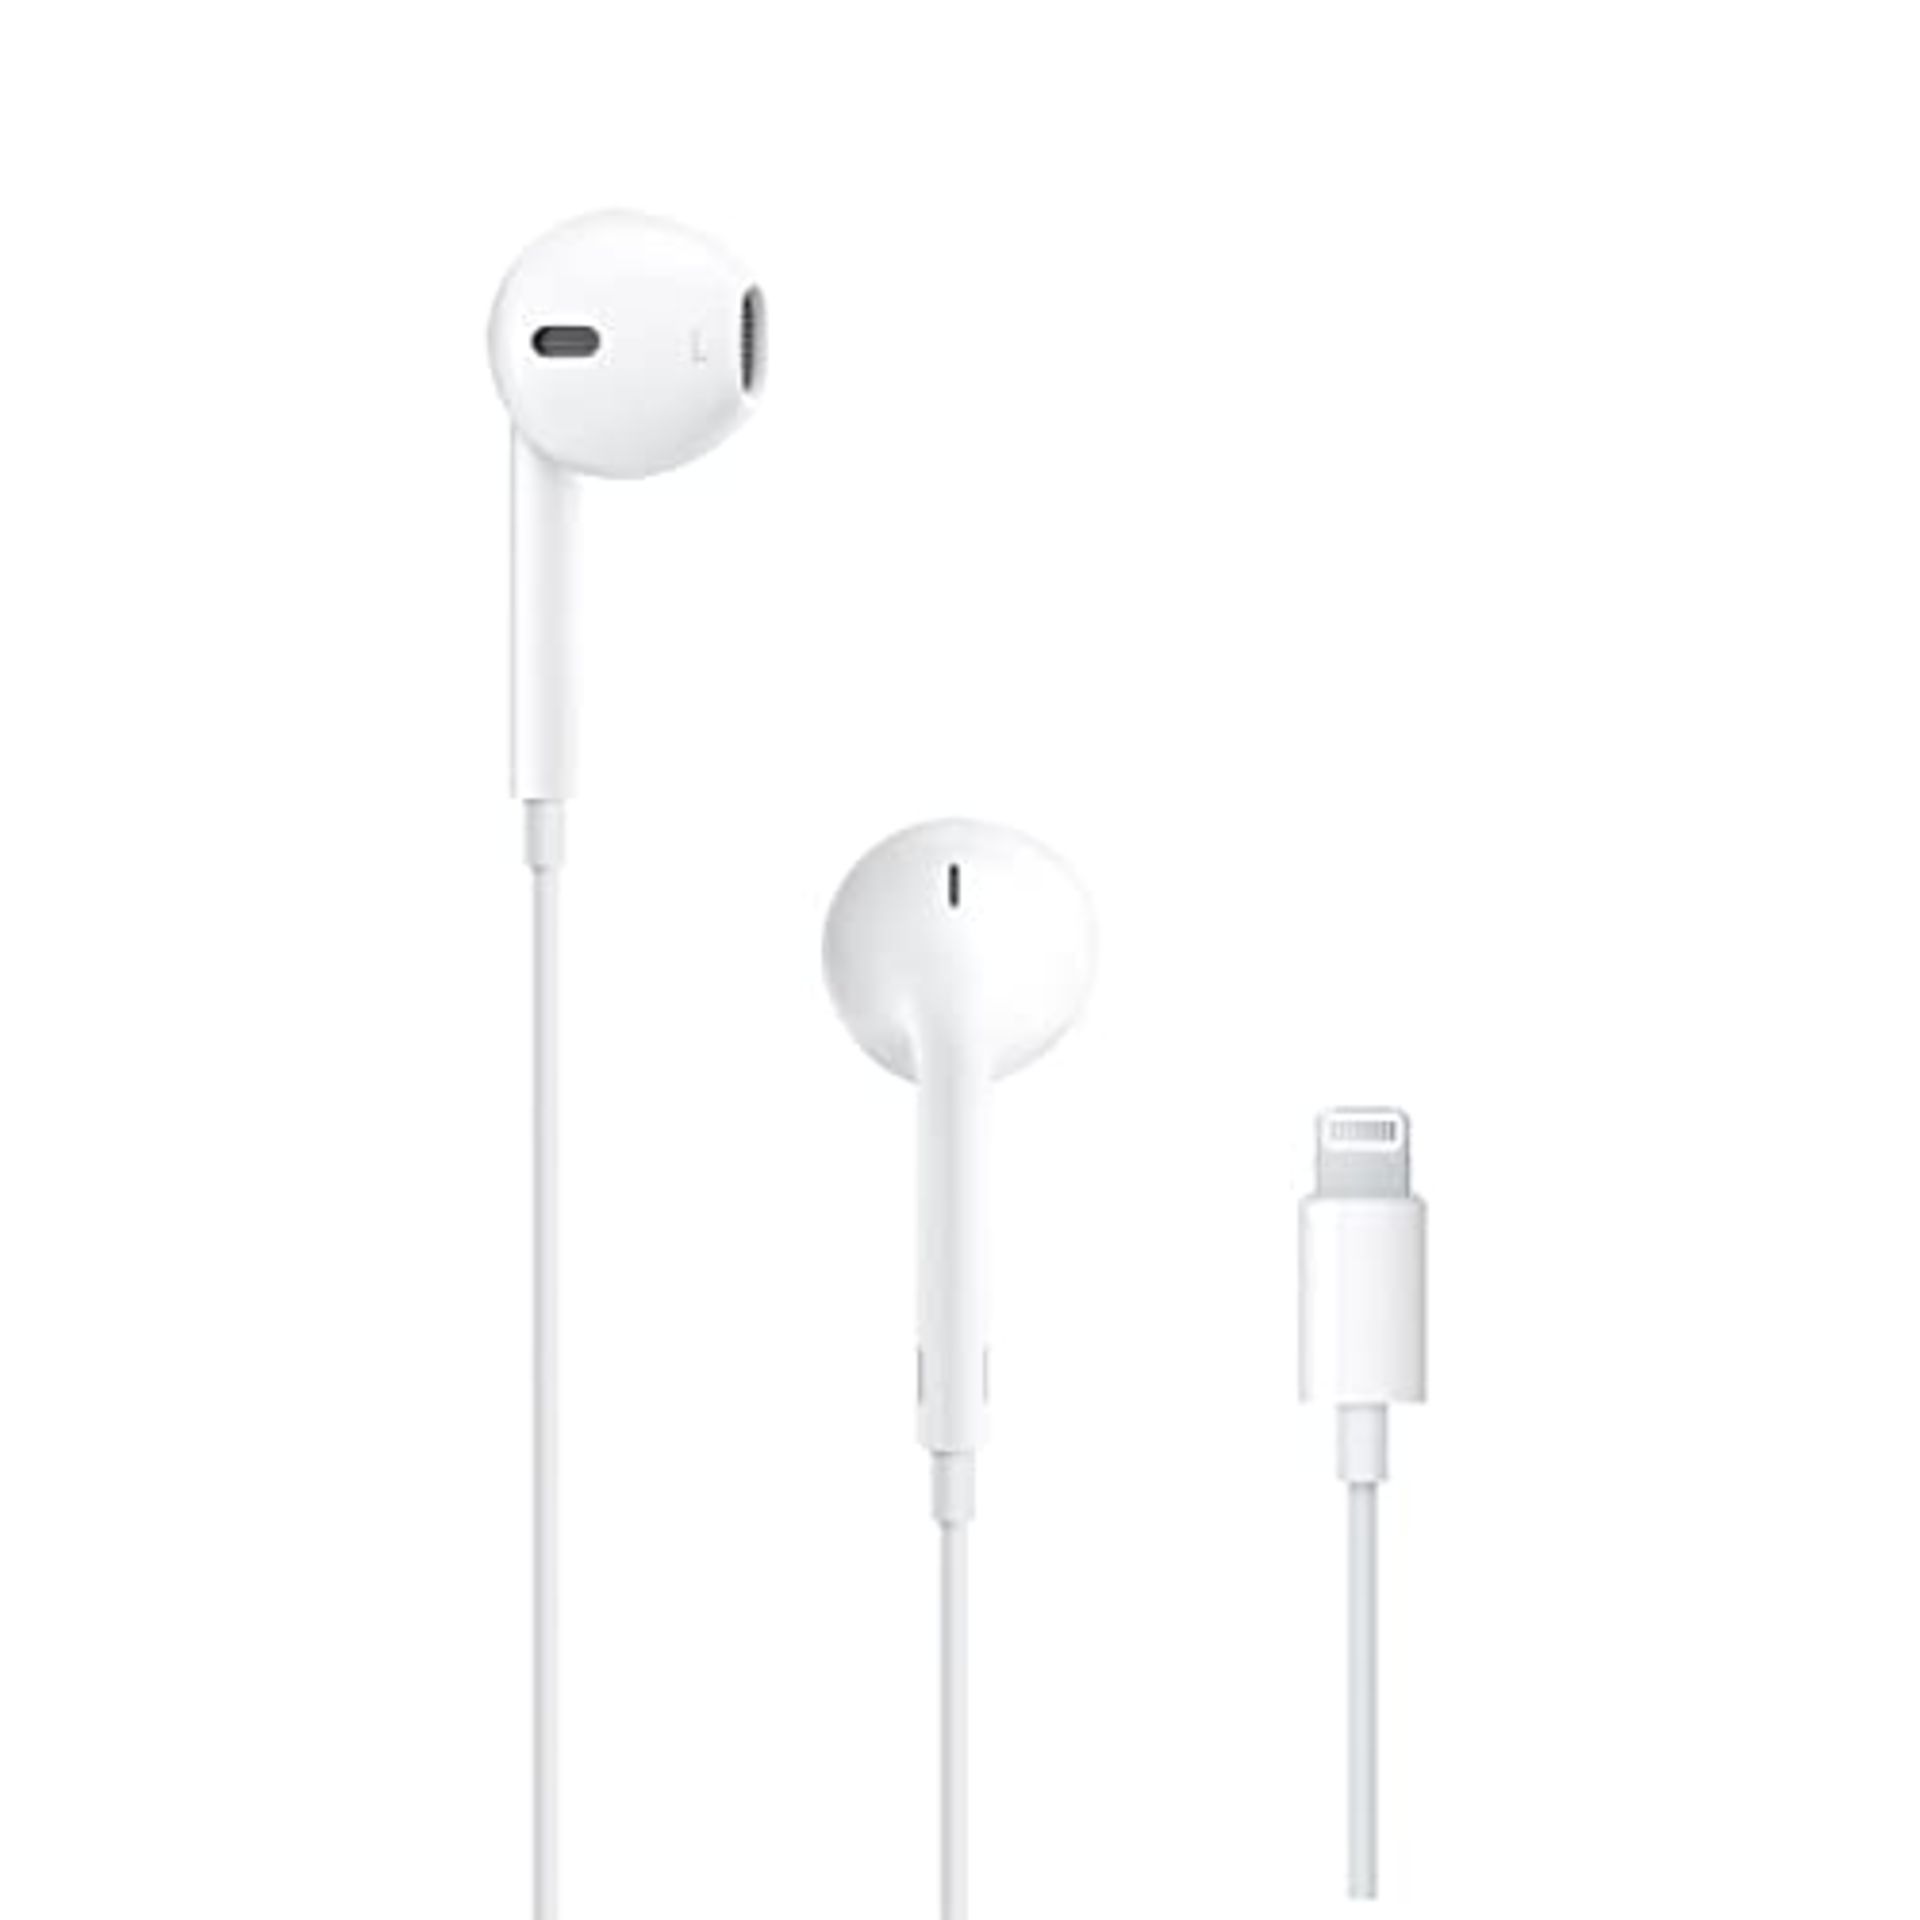 Apple EarPods with Lightning connector - Image 4 of 6